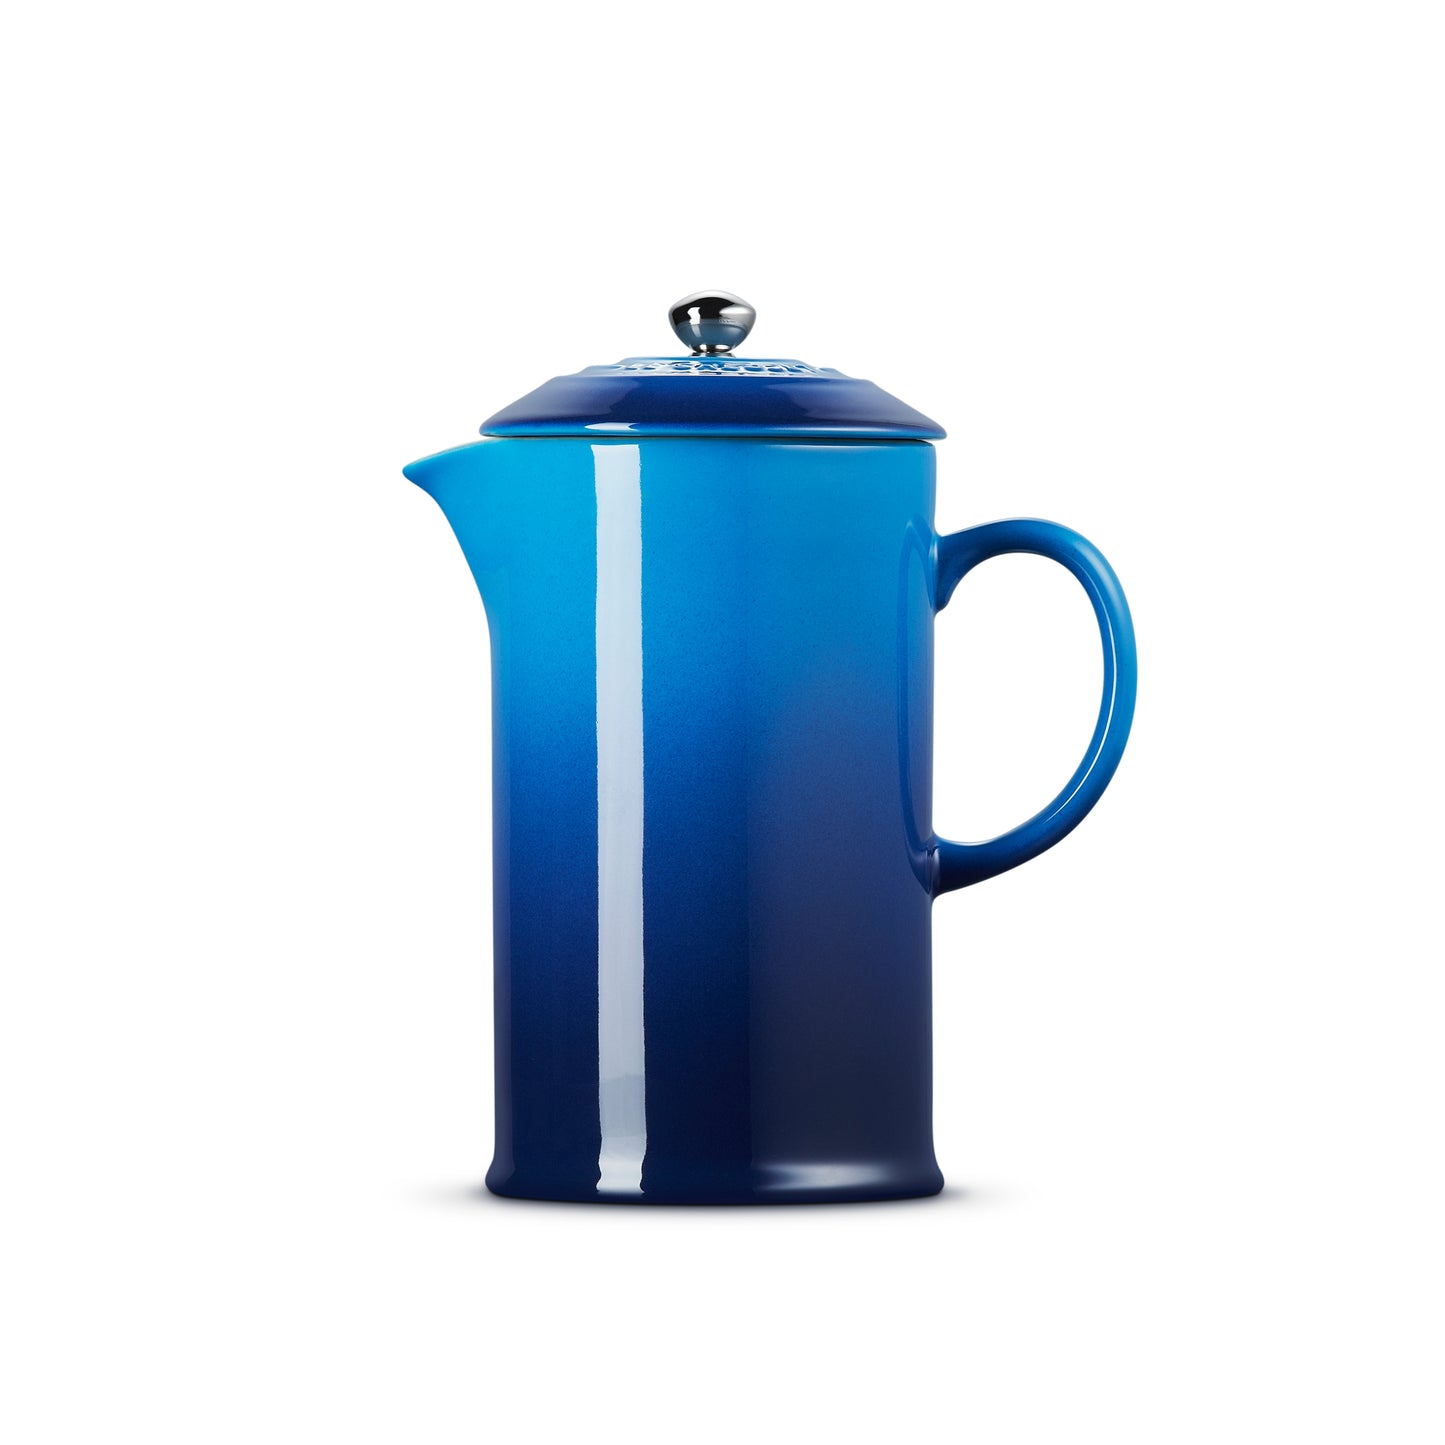 Le Creuset Stoneware French Press in Azure Blue 